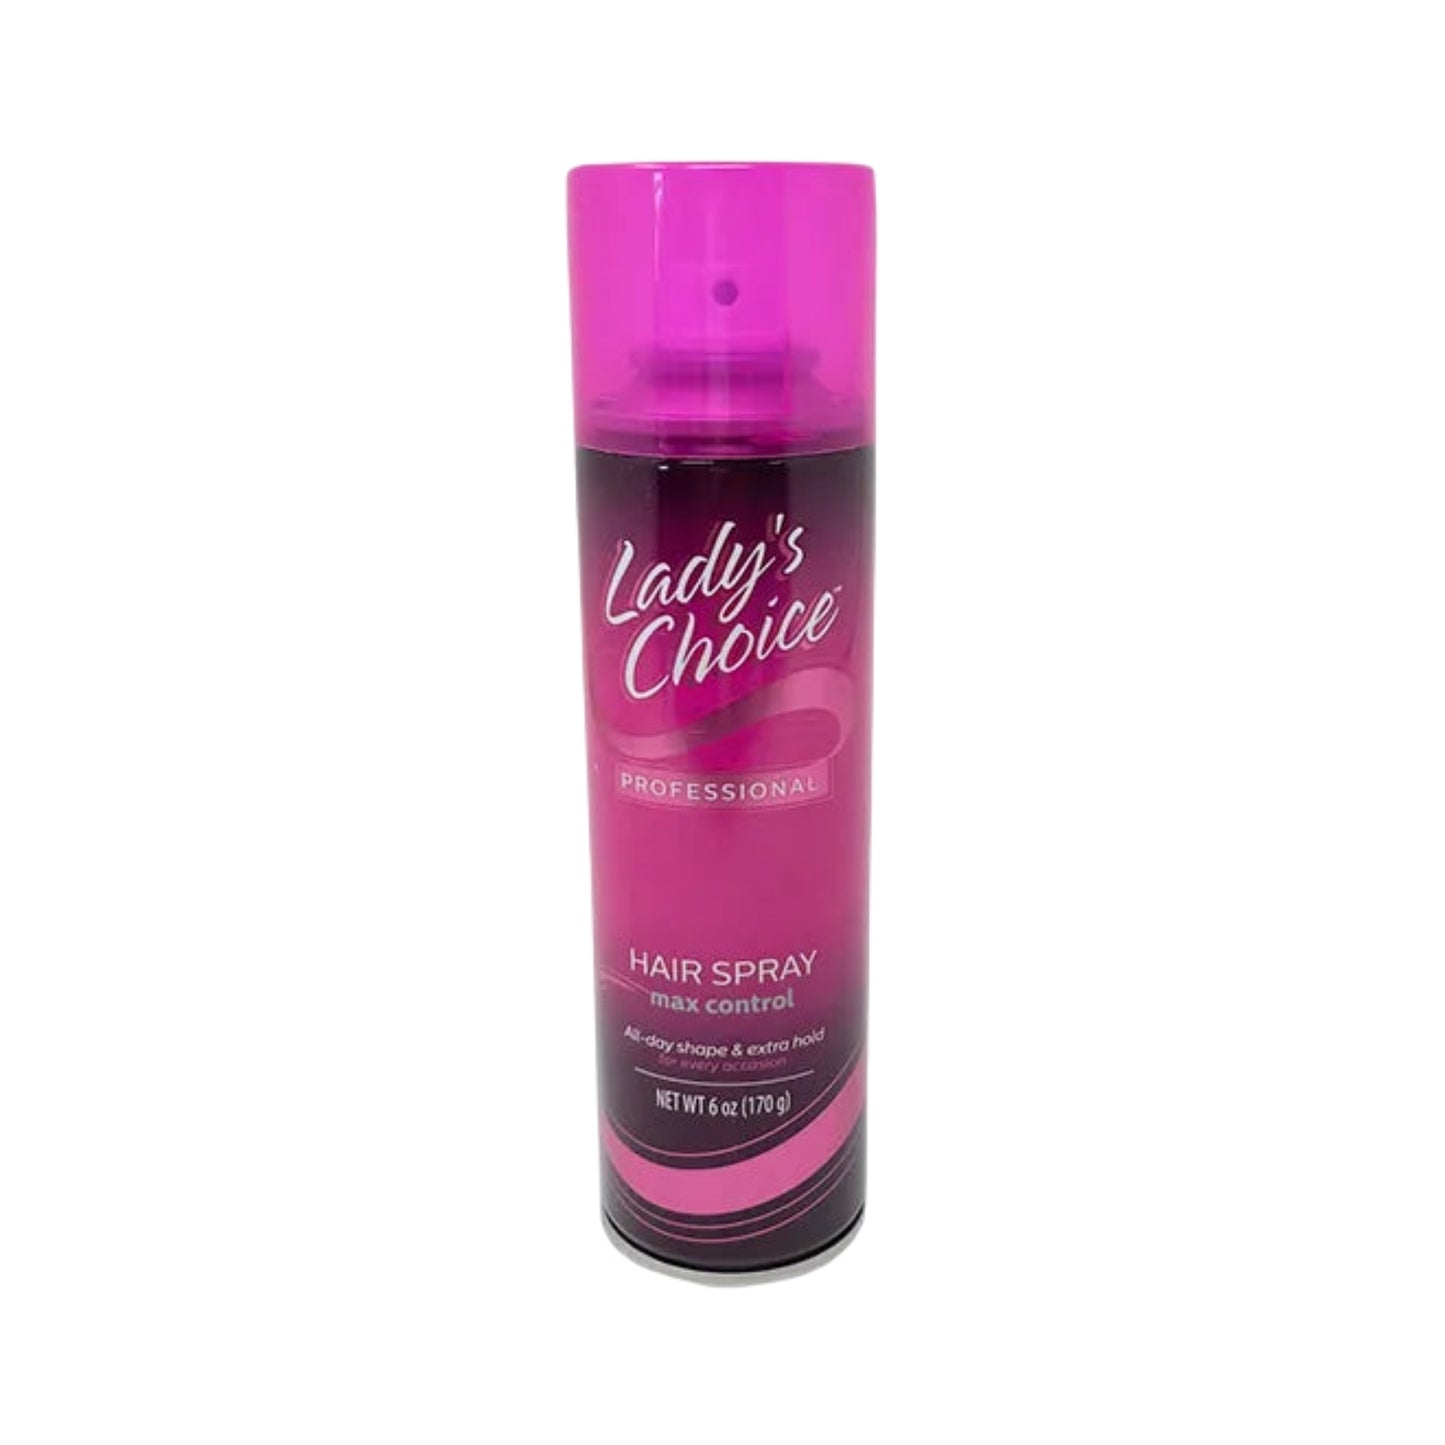 Lady's Choice Professional Hair Spray, Max Control, All-Day Shape & Extra Hold